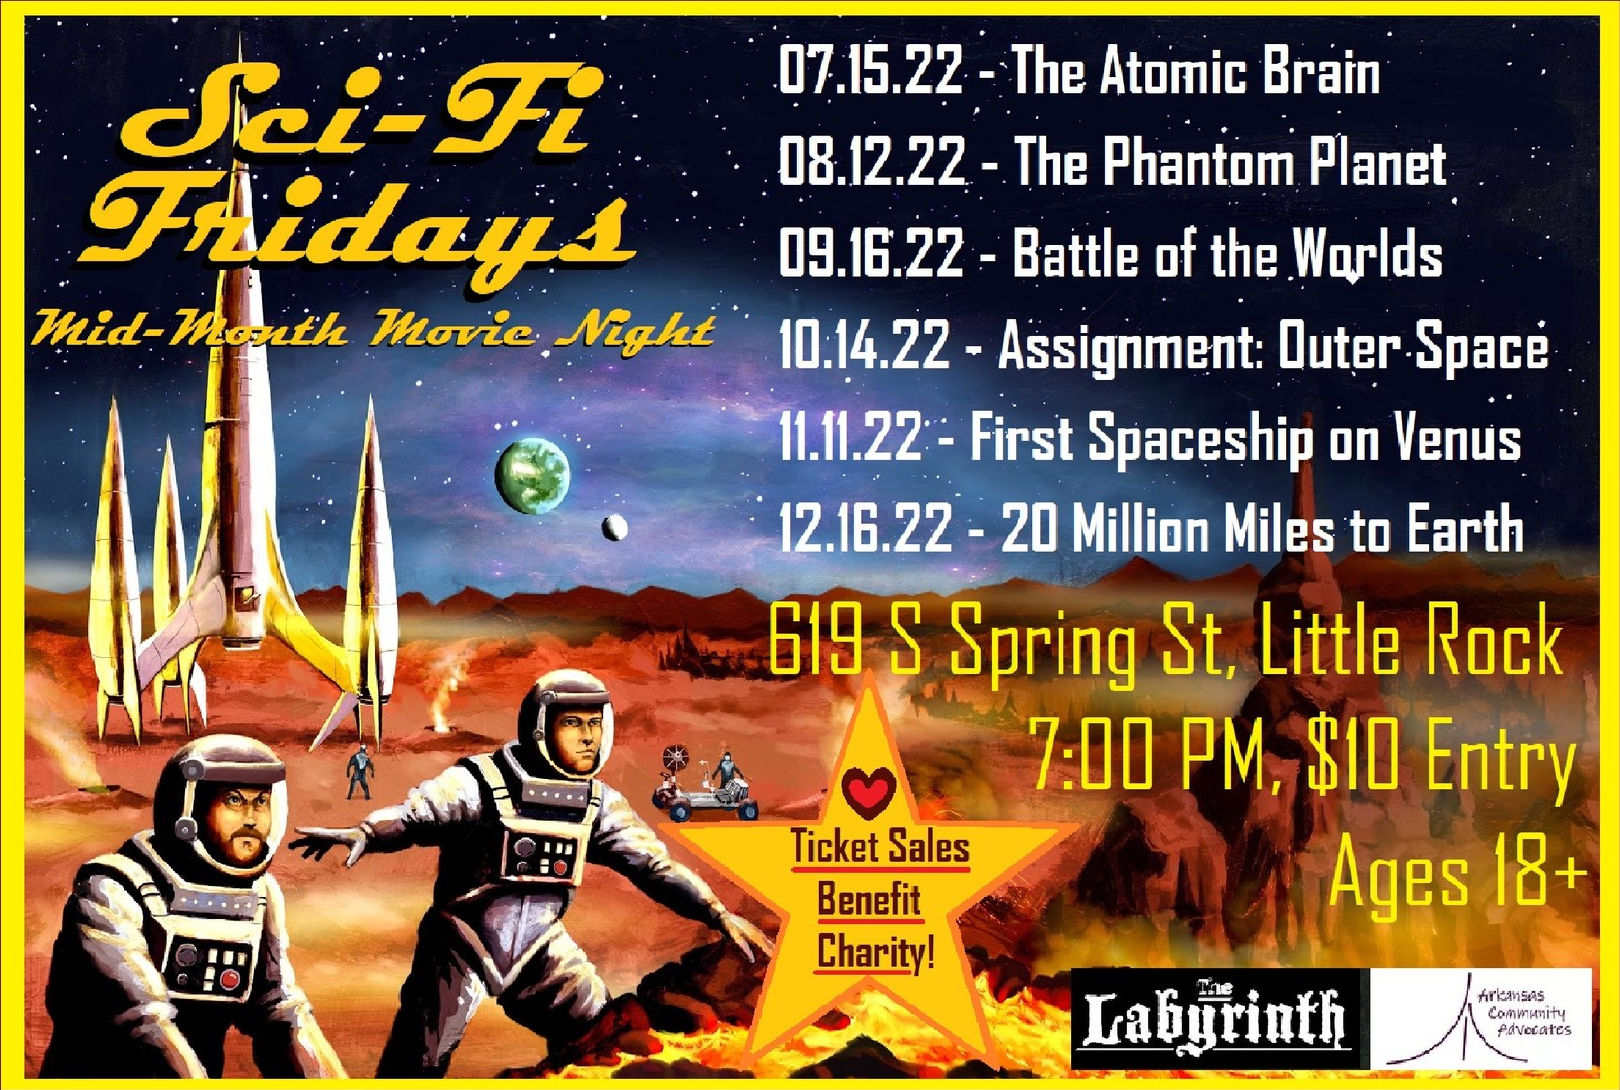 Flyer for Sci-Fi Fridays at The Labyrinth. 20 Million Miles to Earth. Friday, December 16, 2022 at 7 PM. Entry is $10. The Labyrinth, 619 South Spring Street in Little Rock, Arkansas.